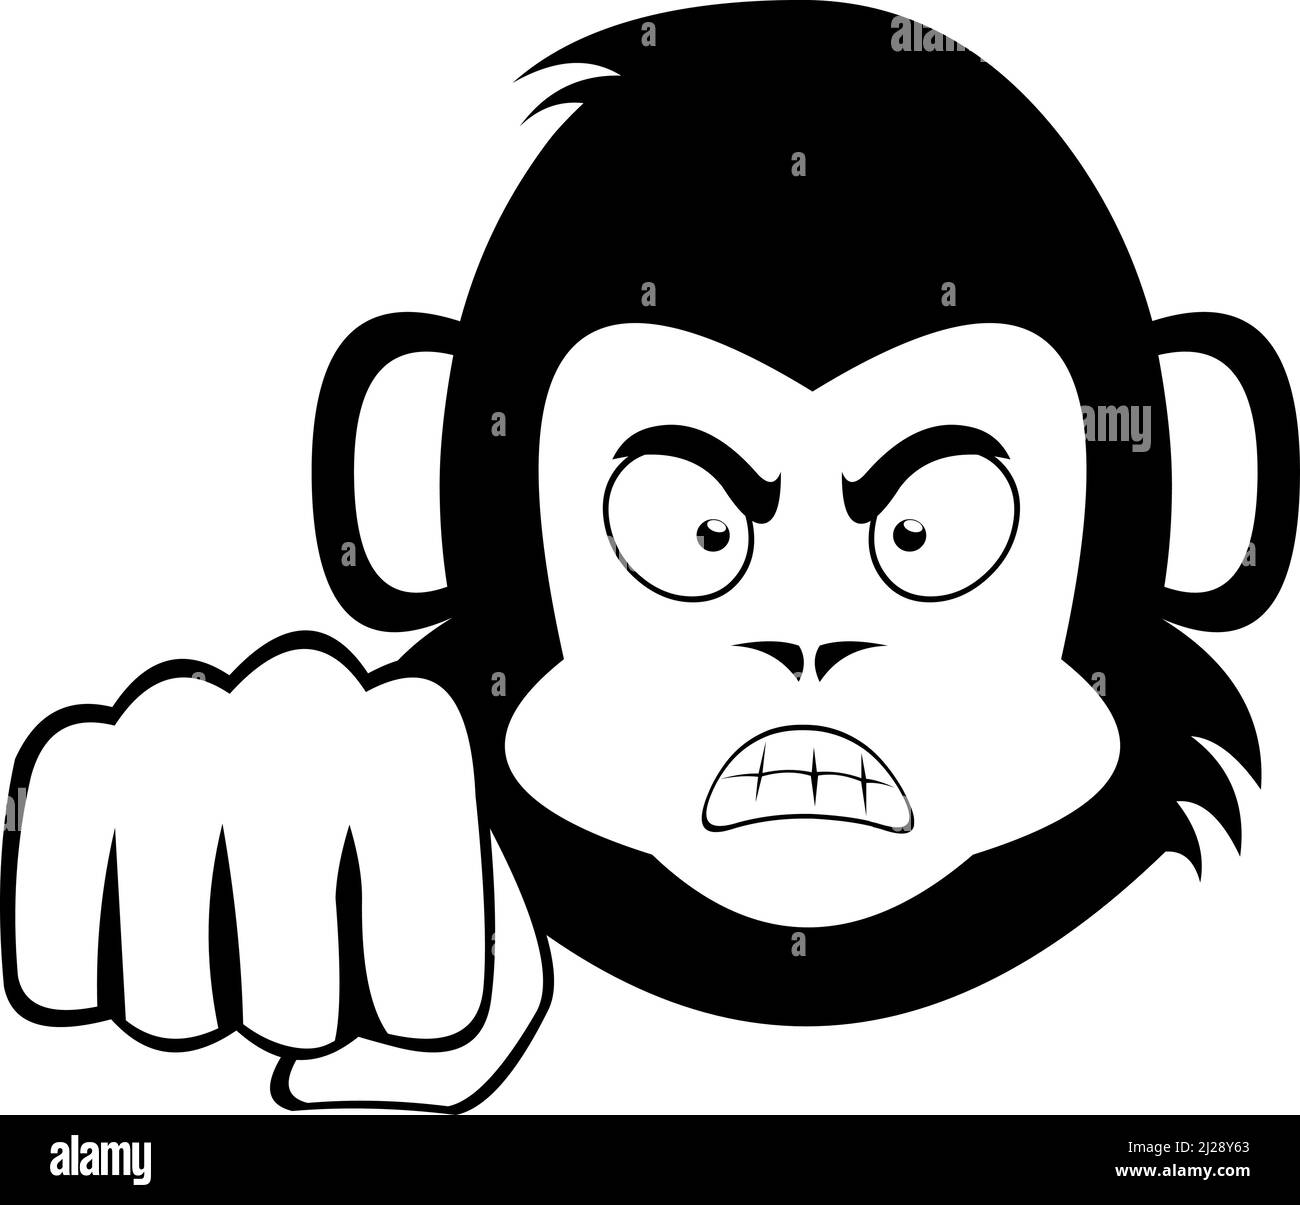 Vector illustration of the face of a cartoon monkey or gorilla with an angry expression and giving a fist bump Stock Vector